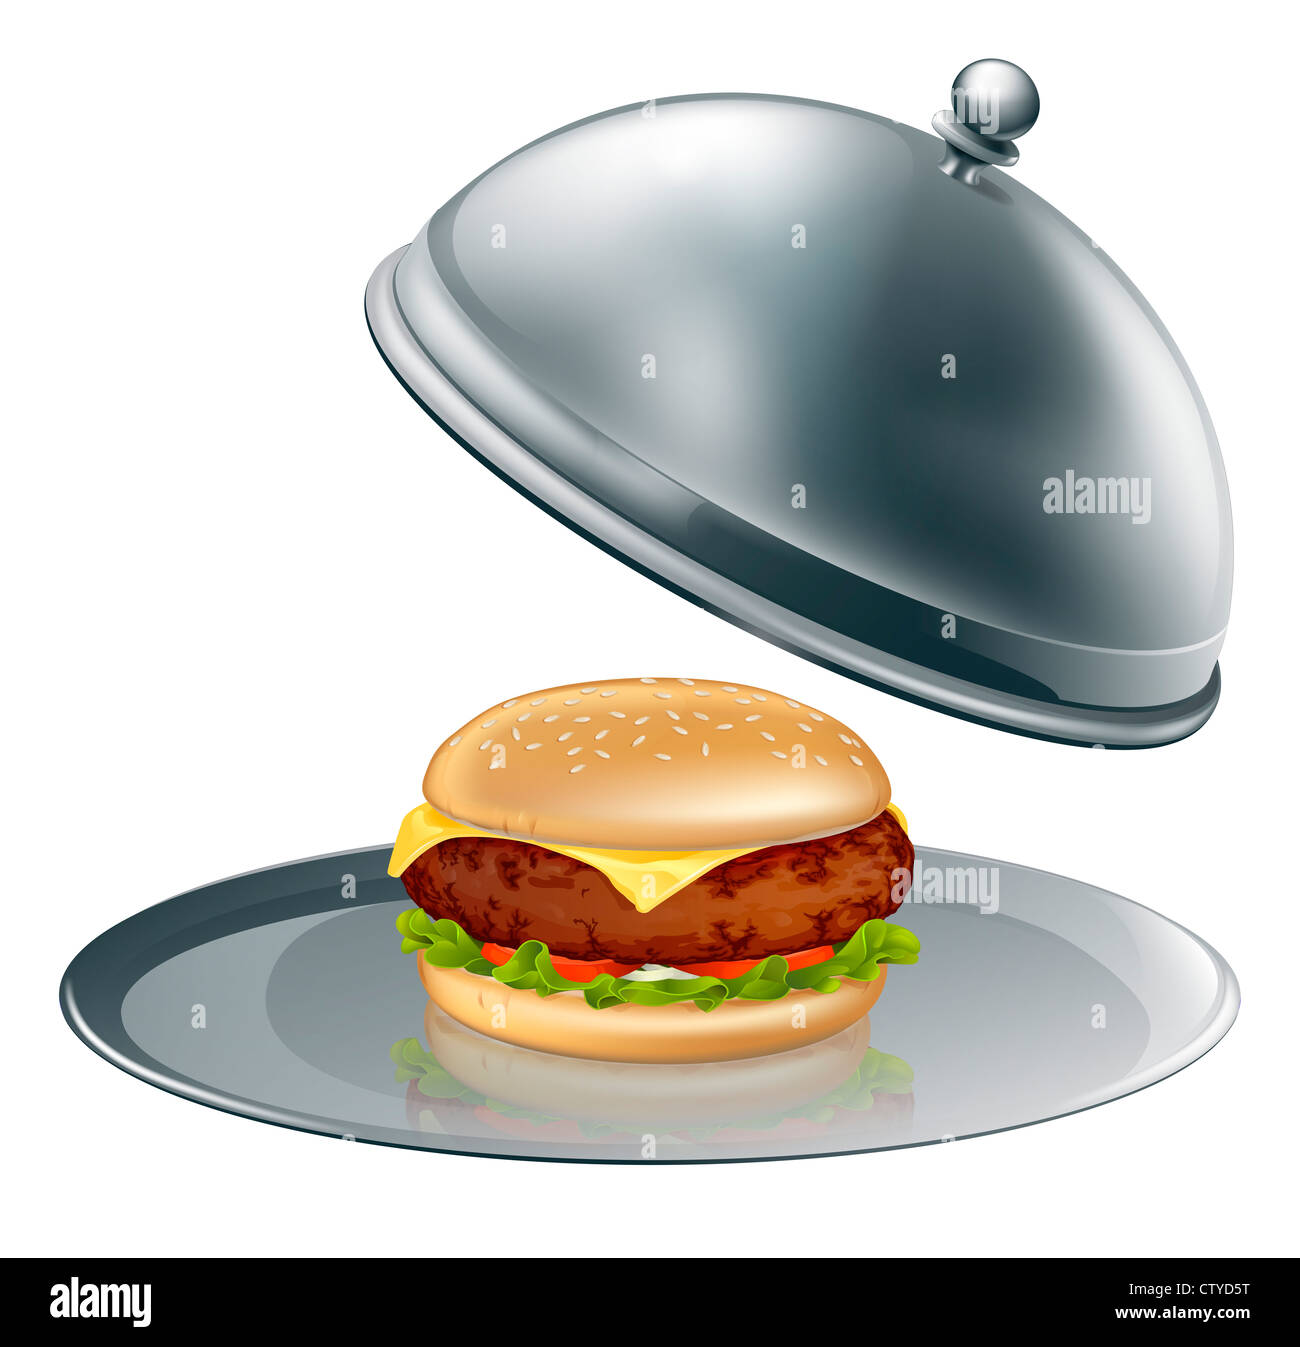 Illustration of a cheese burger on silver platter. Could be a concept for inflated worth or luxury burgers. Stock Photo